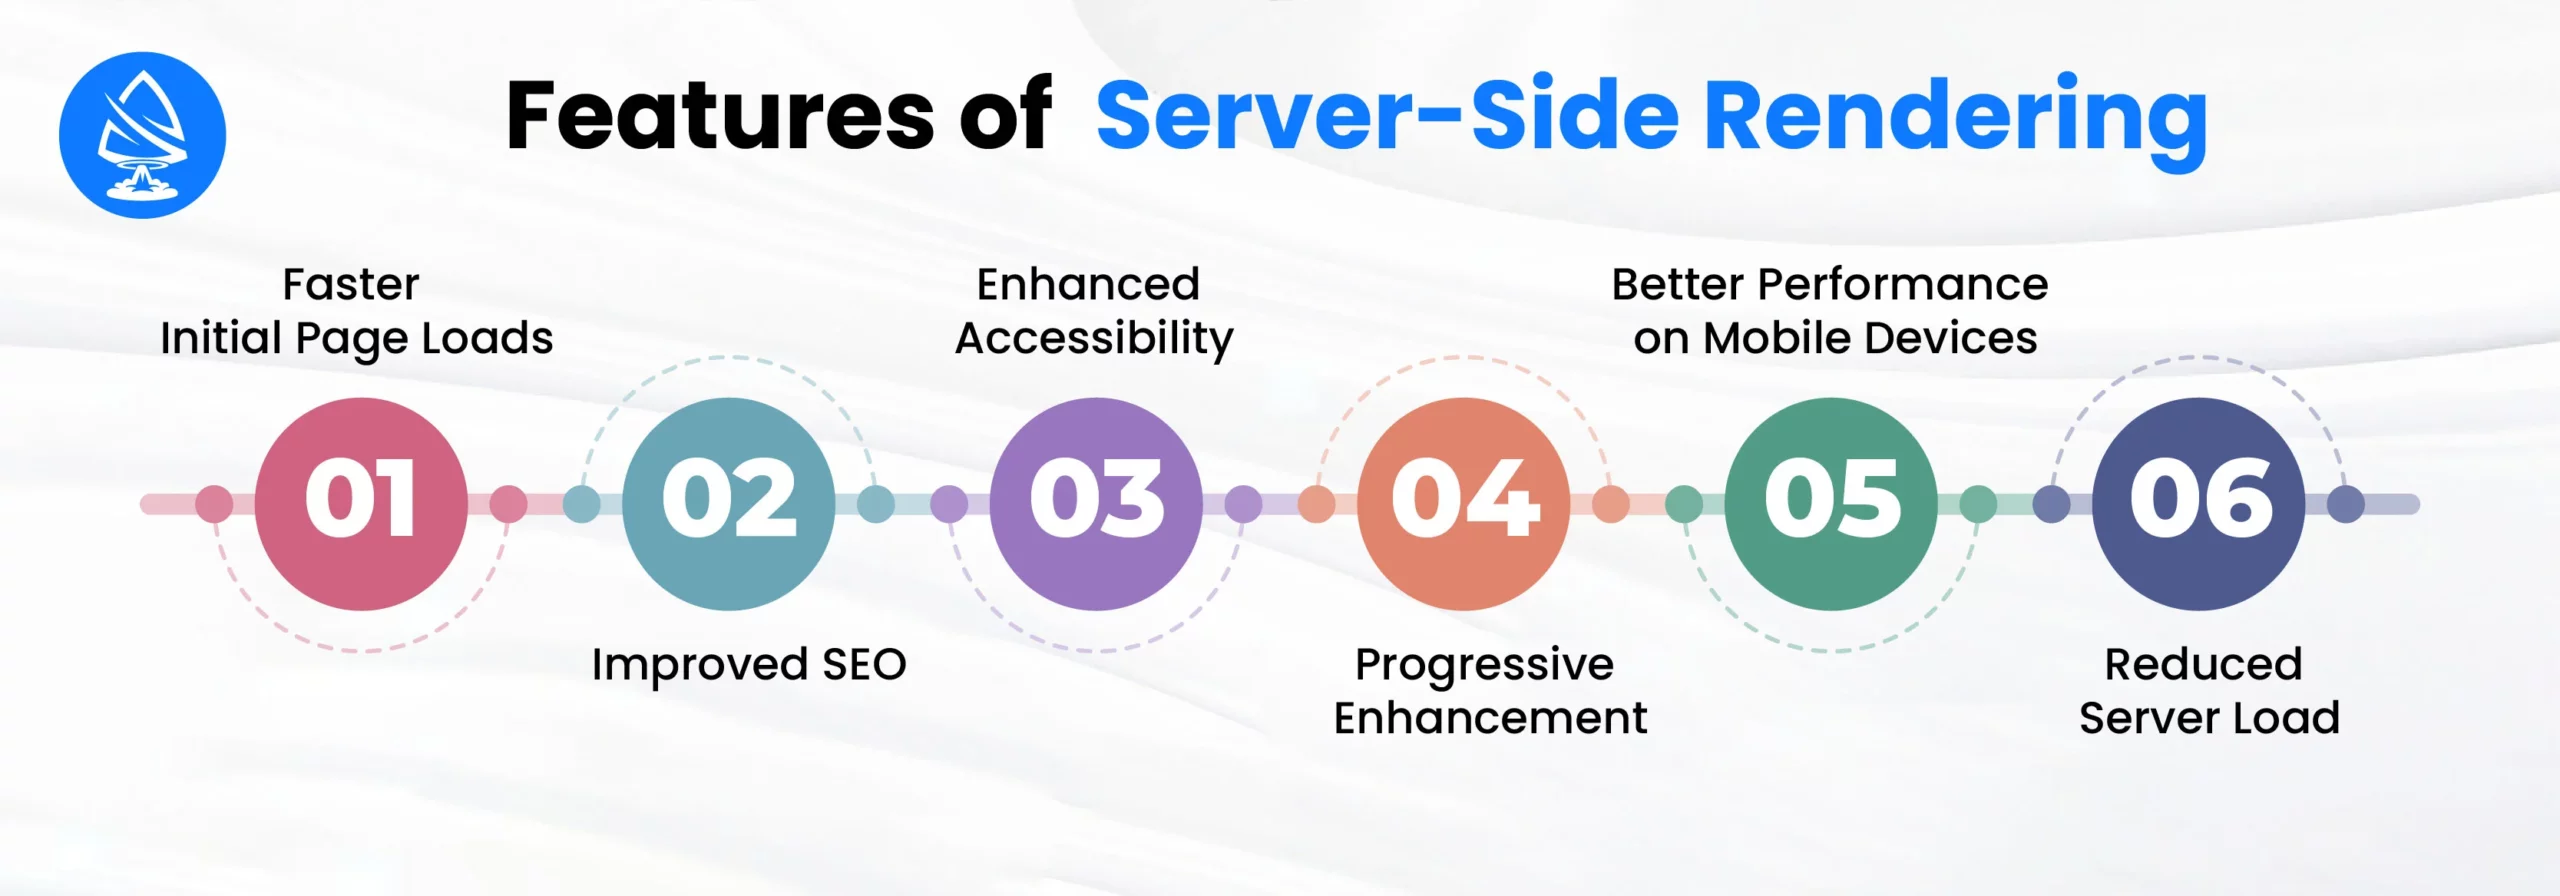 Features of Server-Side Rendering